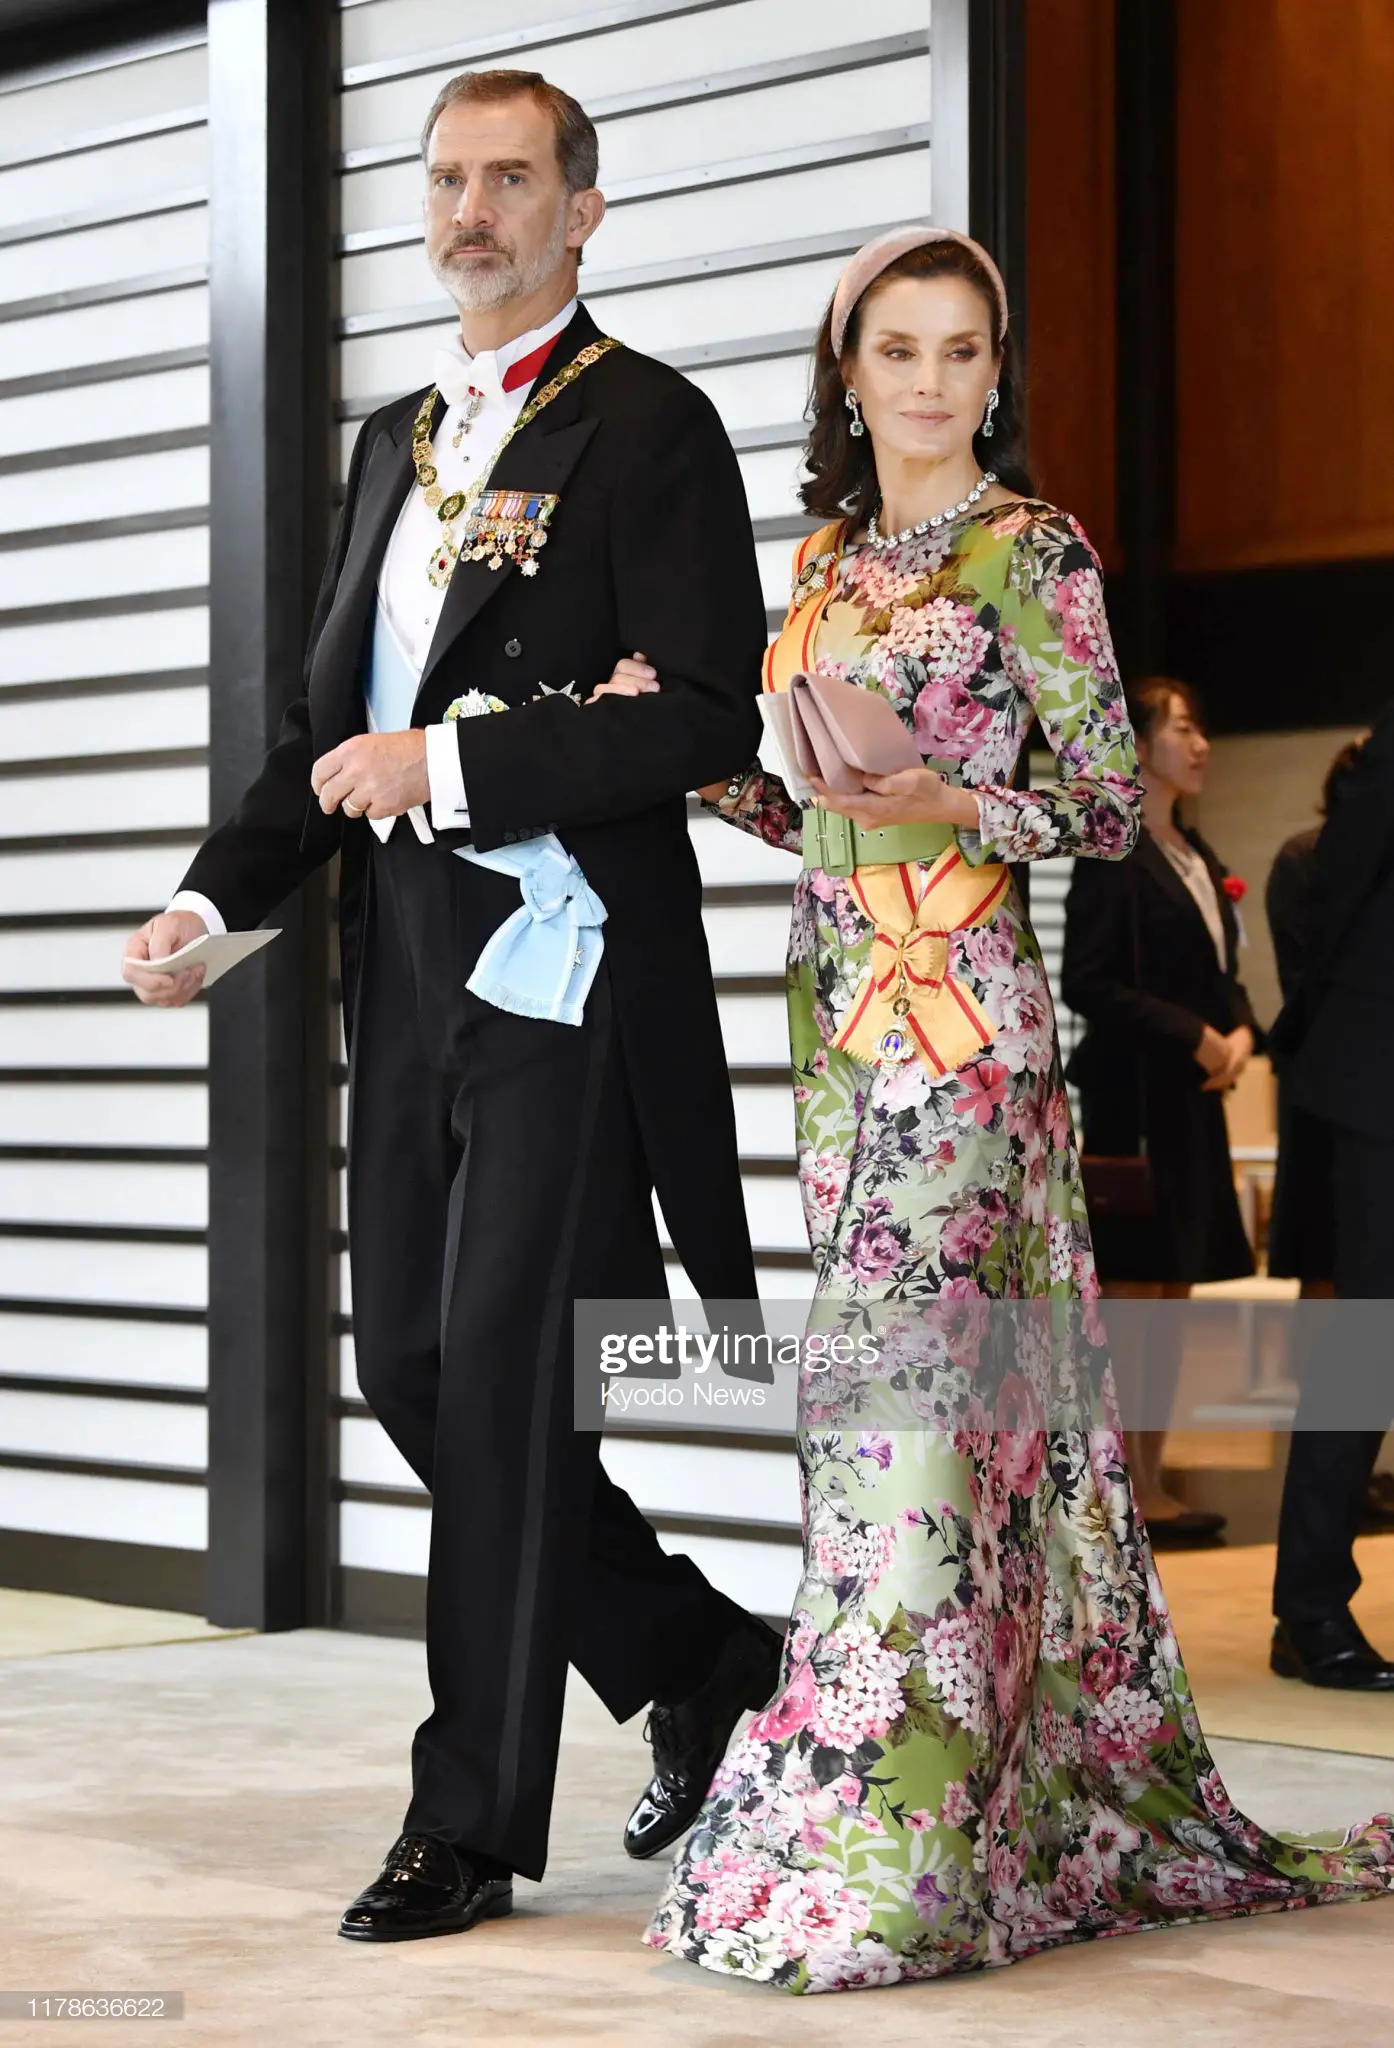 Queen Letizia wore green matilde Cano gown at the coronation of japanese king